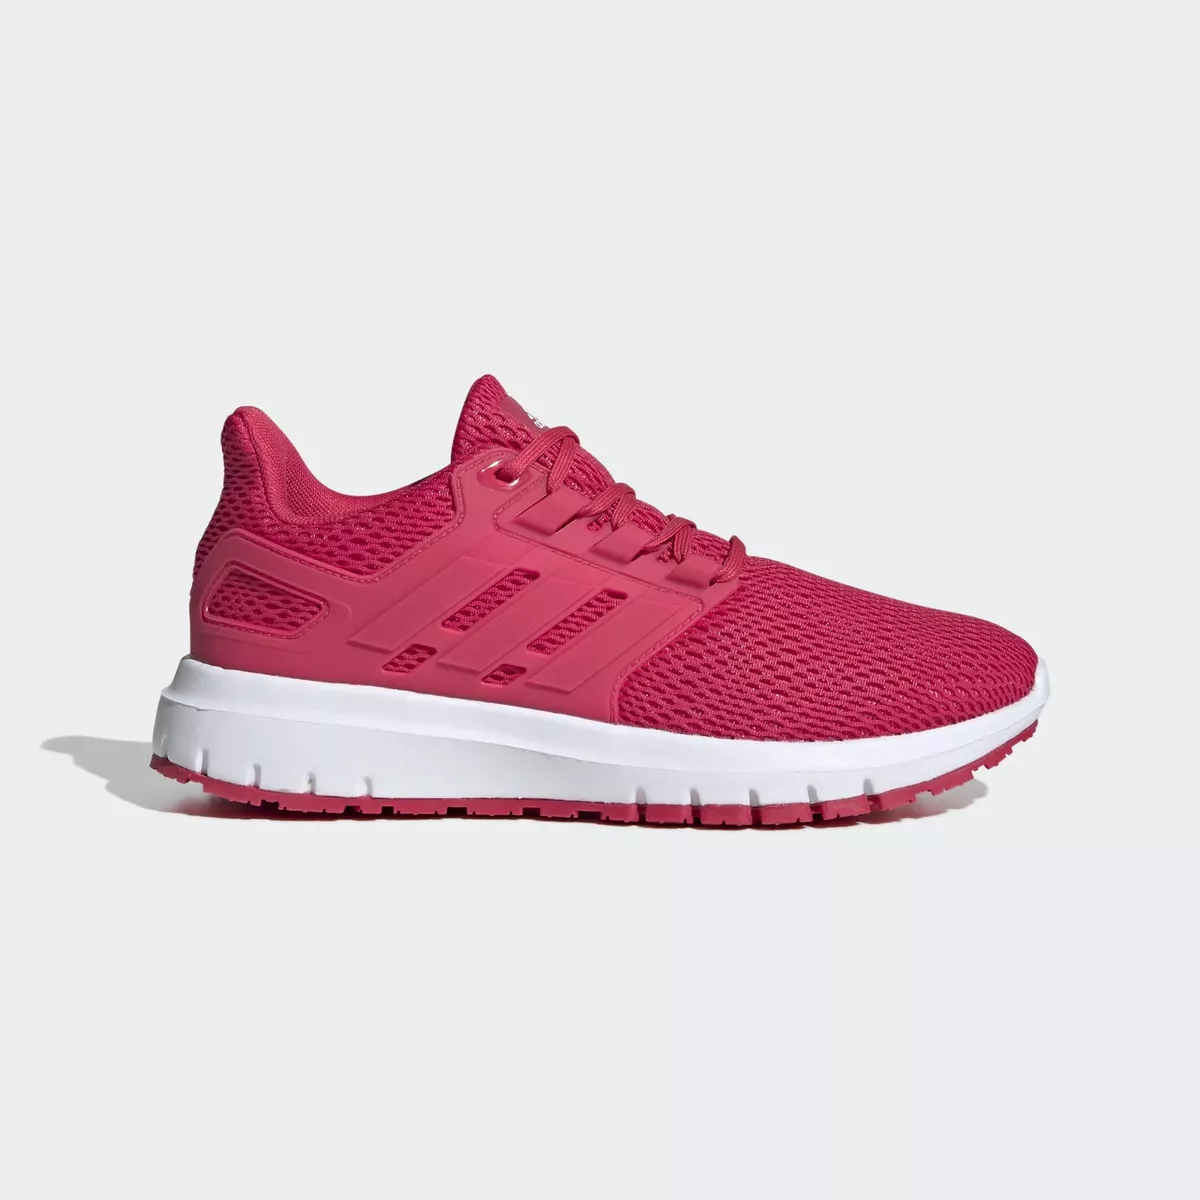 Tenis Para Mujer adidas Ultimashow Color Power Pink/power Pink/cloud White - Adulto 5 Mx